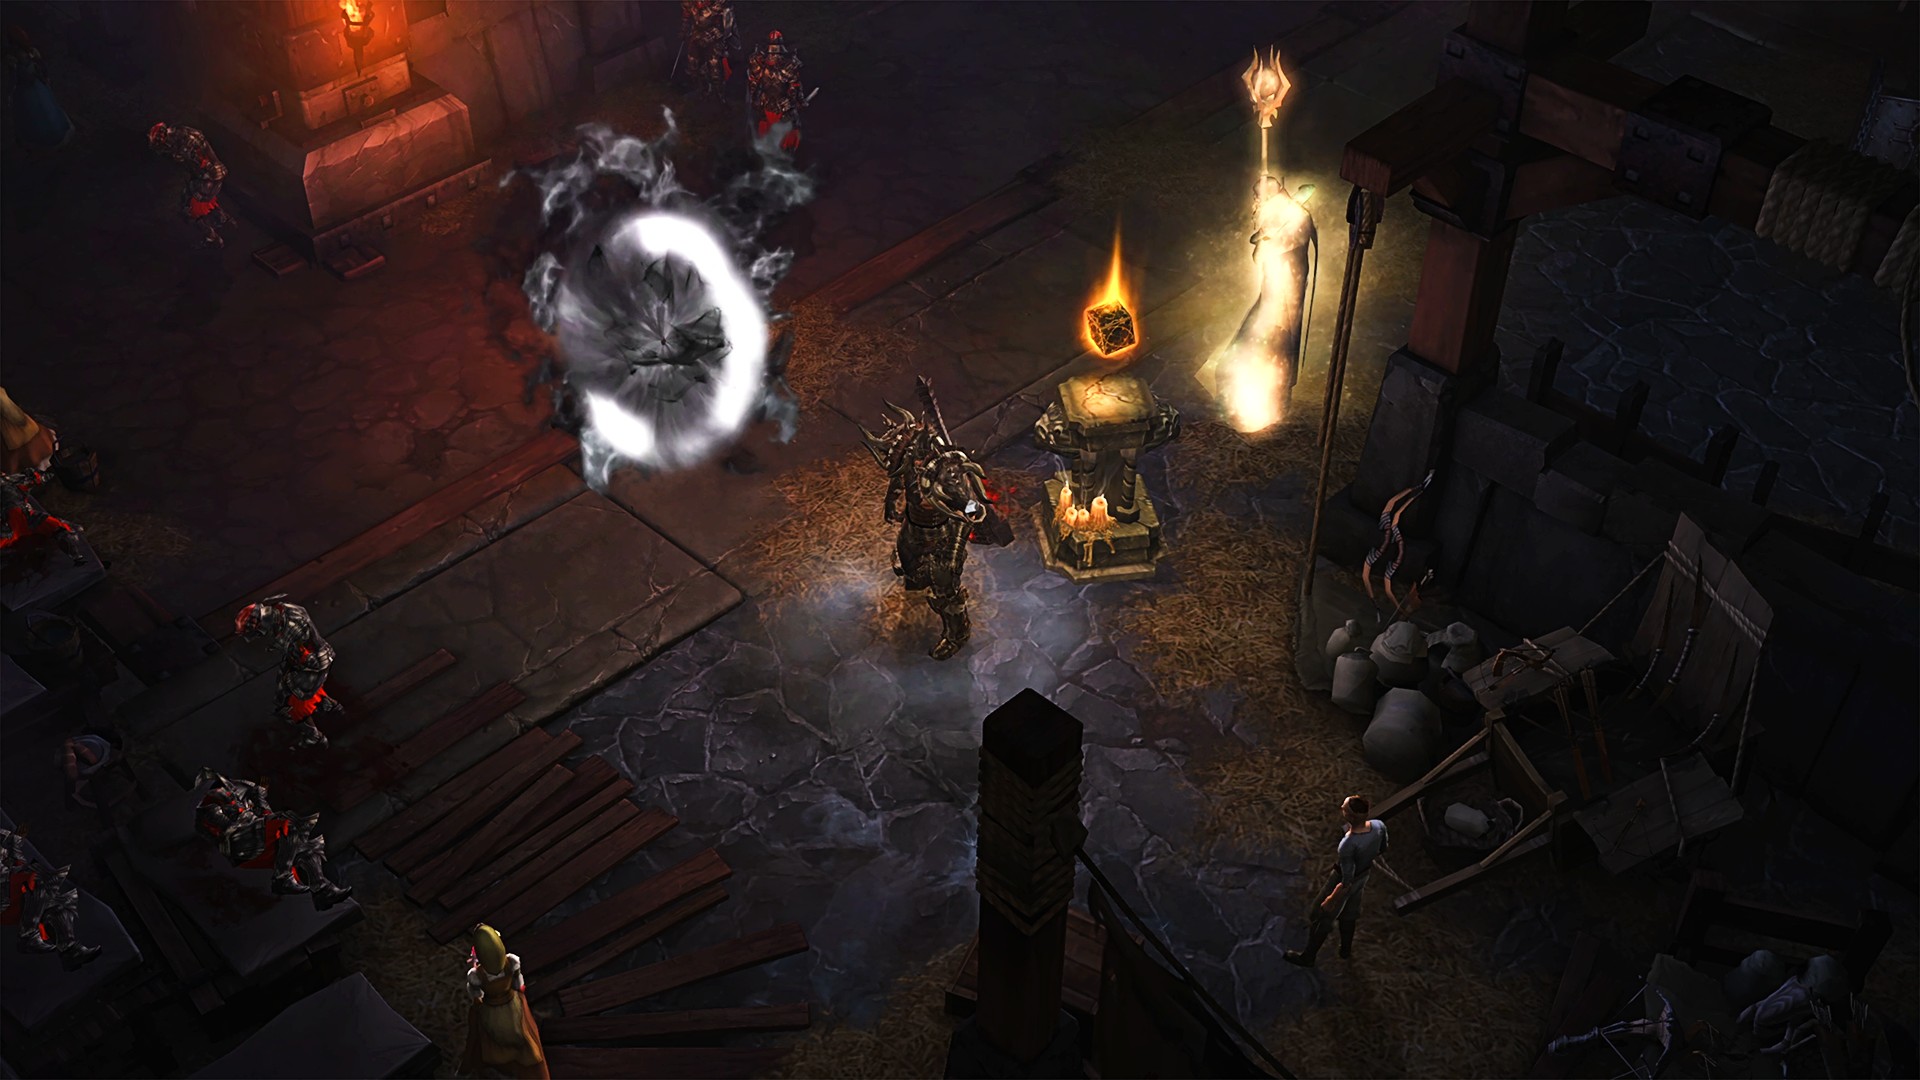 Diablo 3's Echoing Nightmare is now a permanent feature